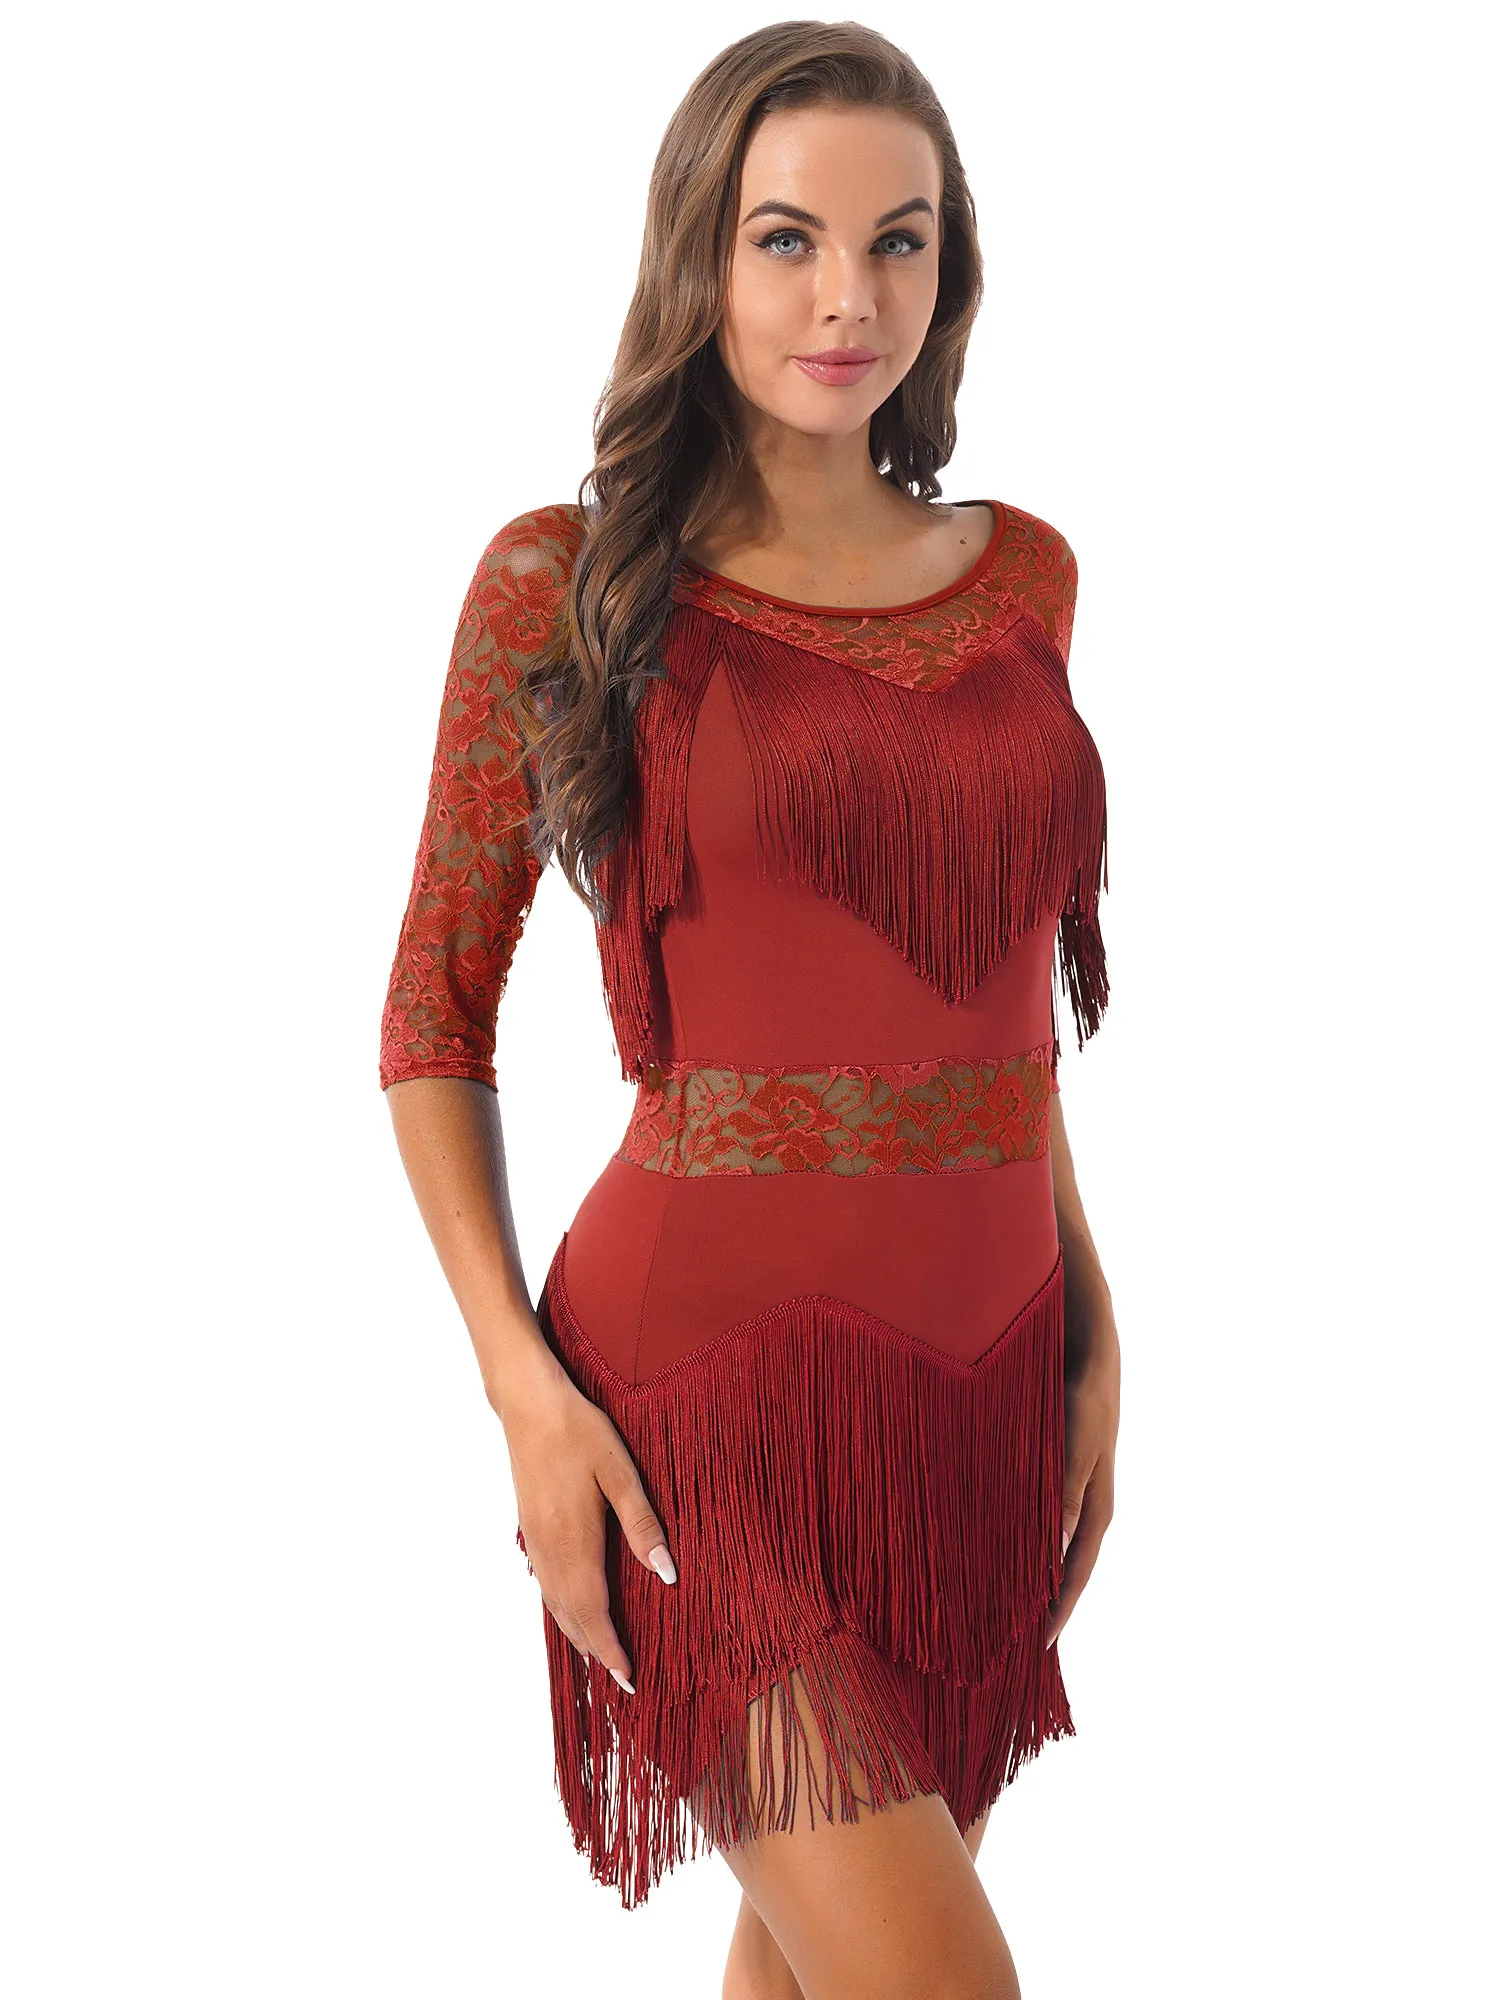 

Women Latin Dance Fringed Dress Sheer Floral Lace Half Sleeve Tassel Dresses with Shorts Waltz Cha-Cha Performance Costumes